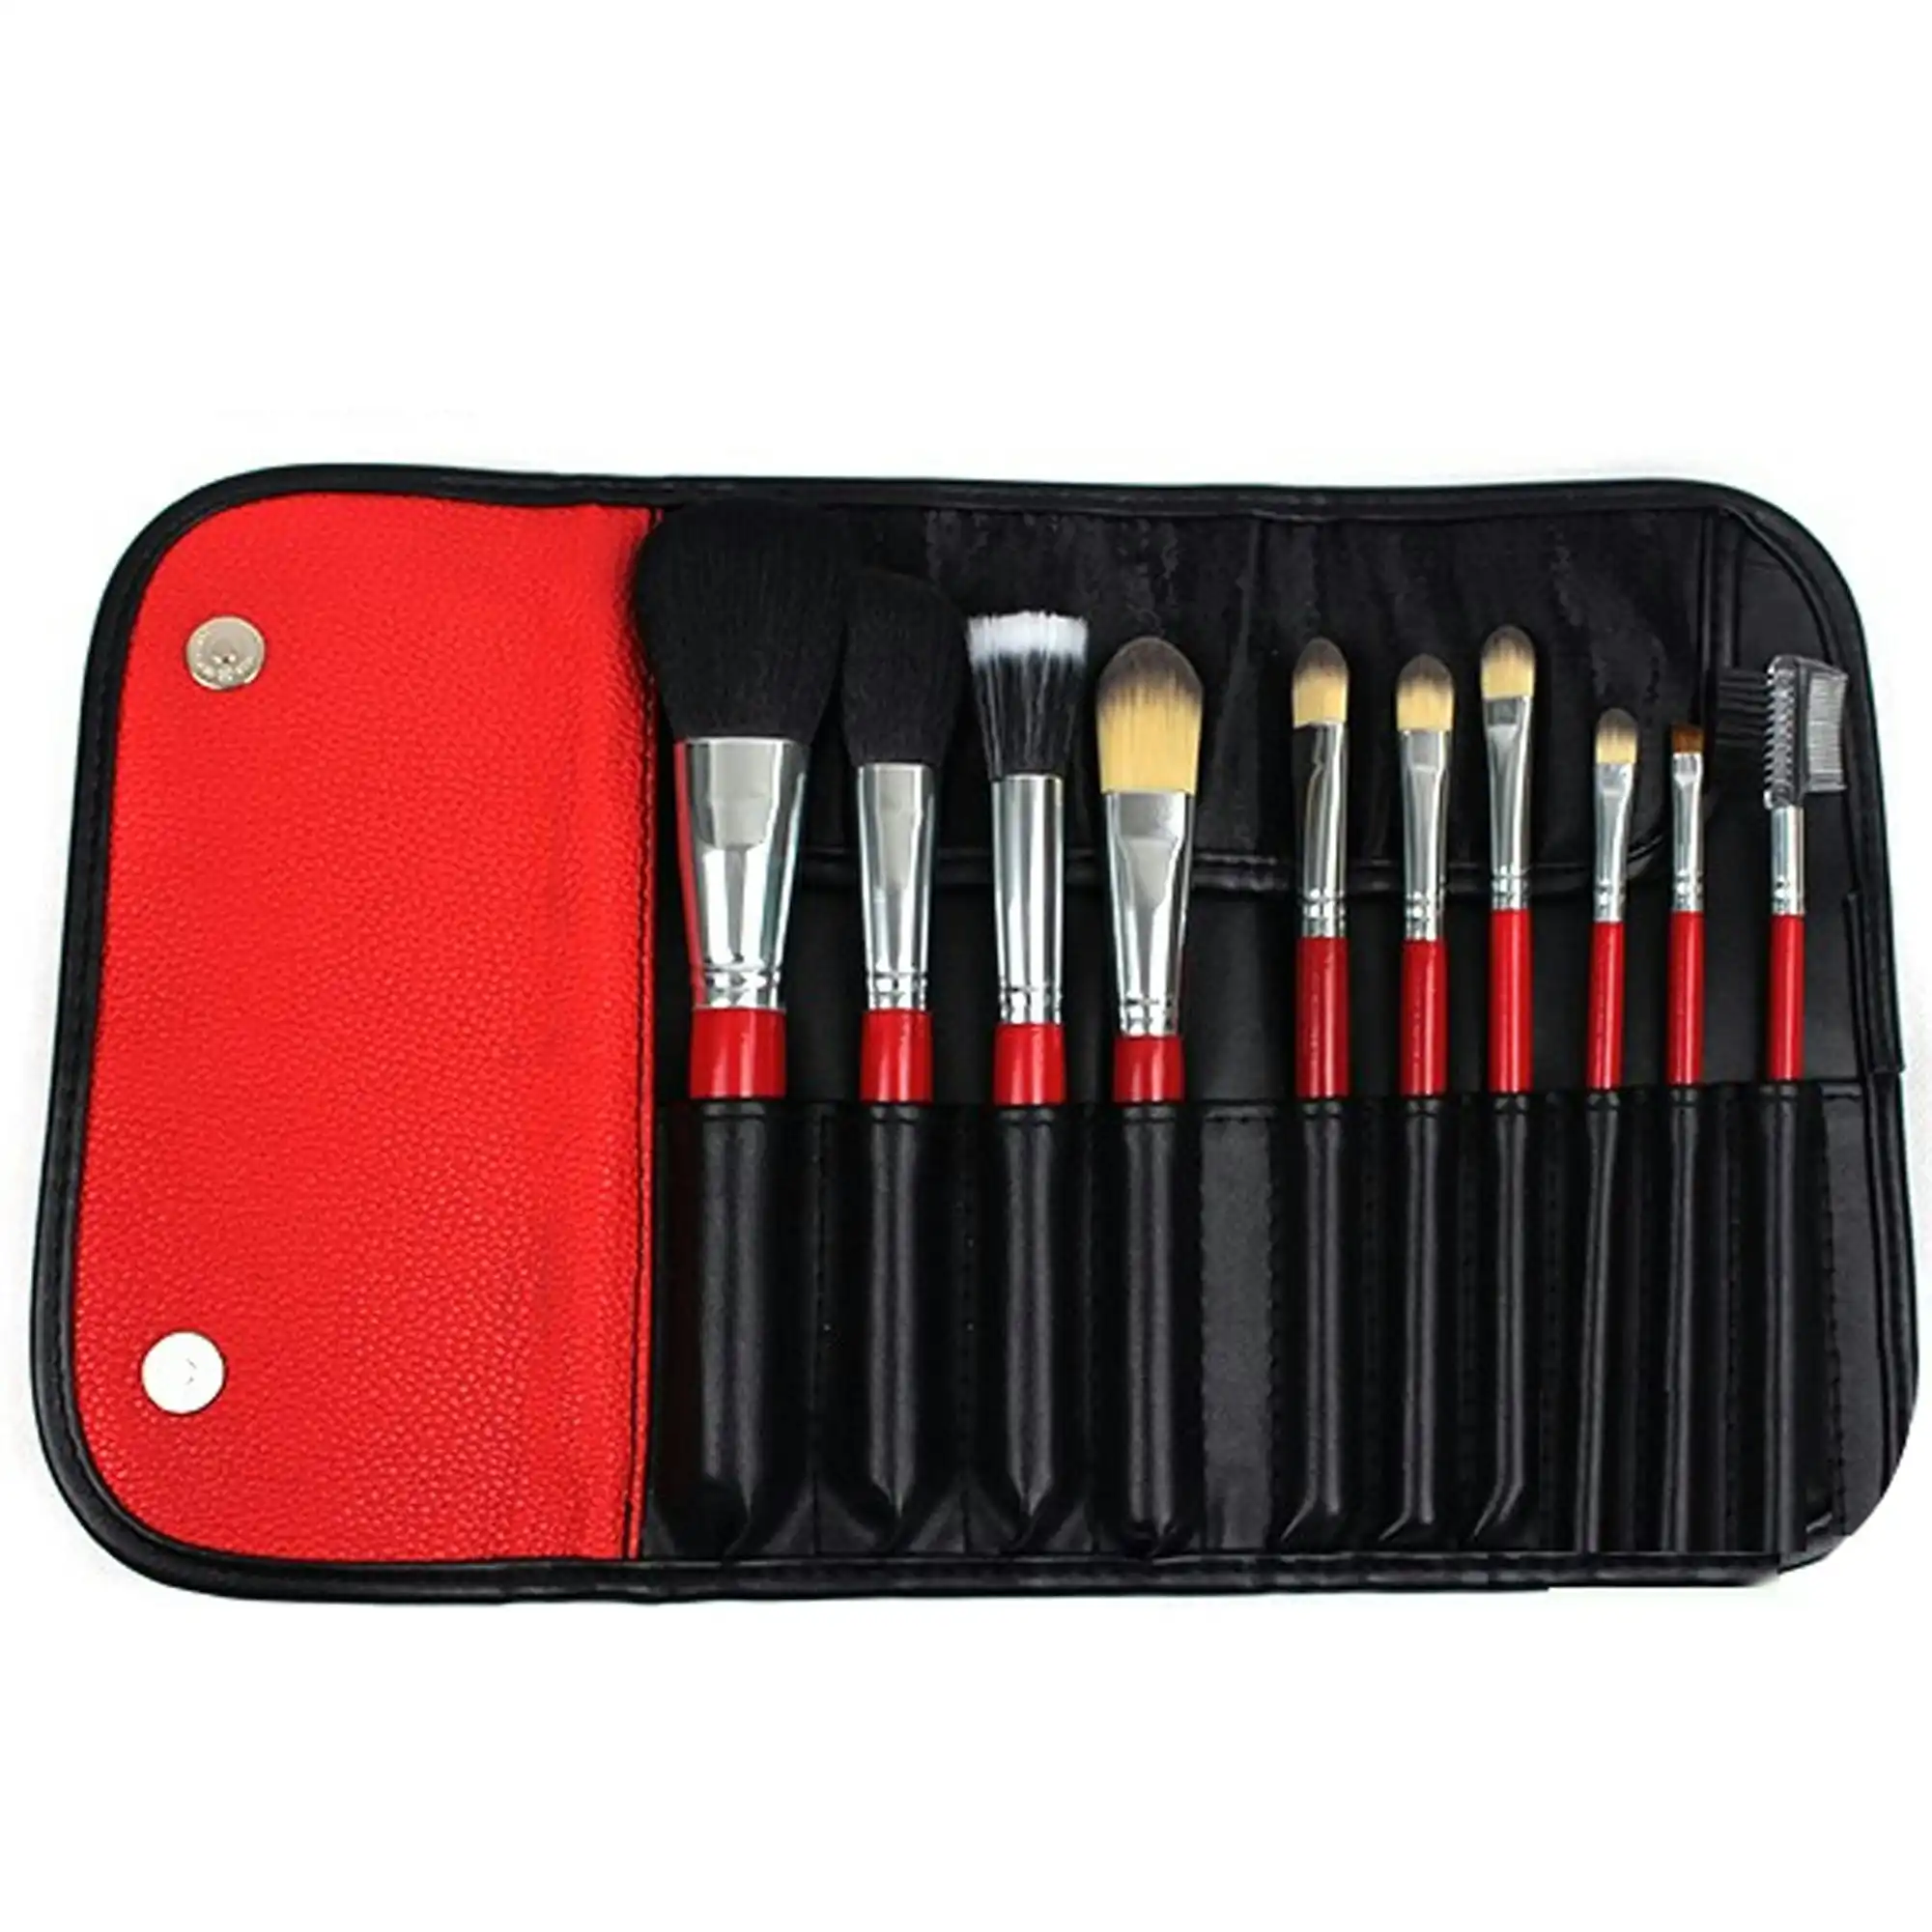 10 Piece Professional Makeup Brush Set Soft Bristle with Carry Case Black Red